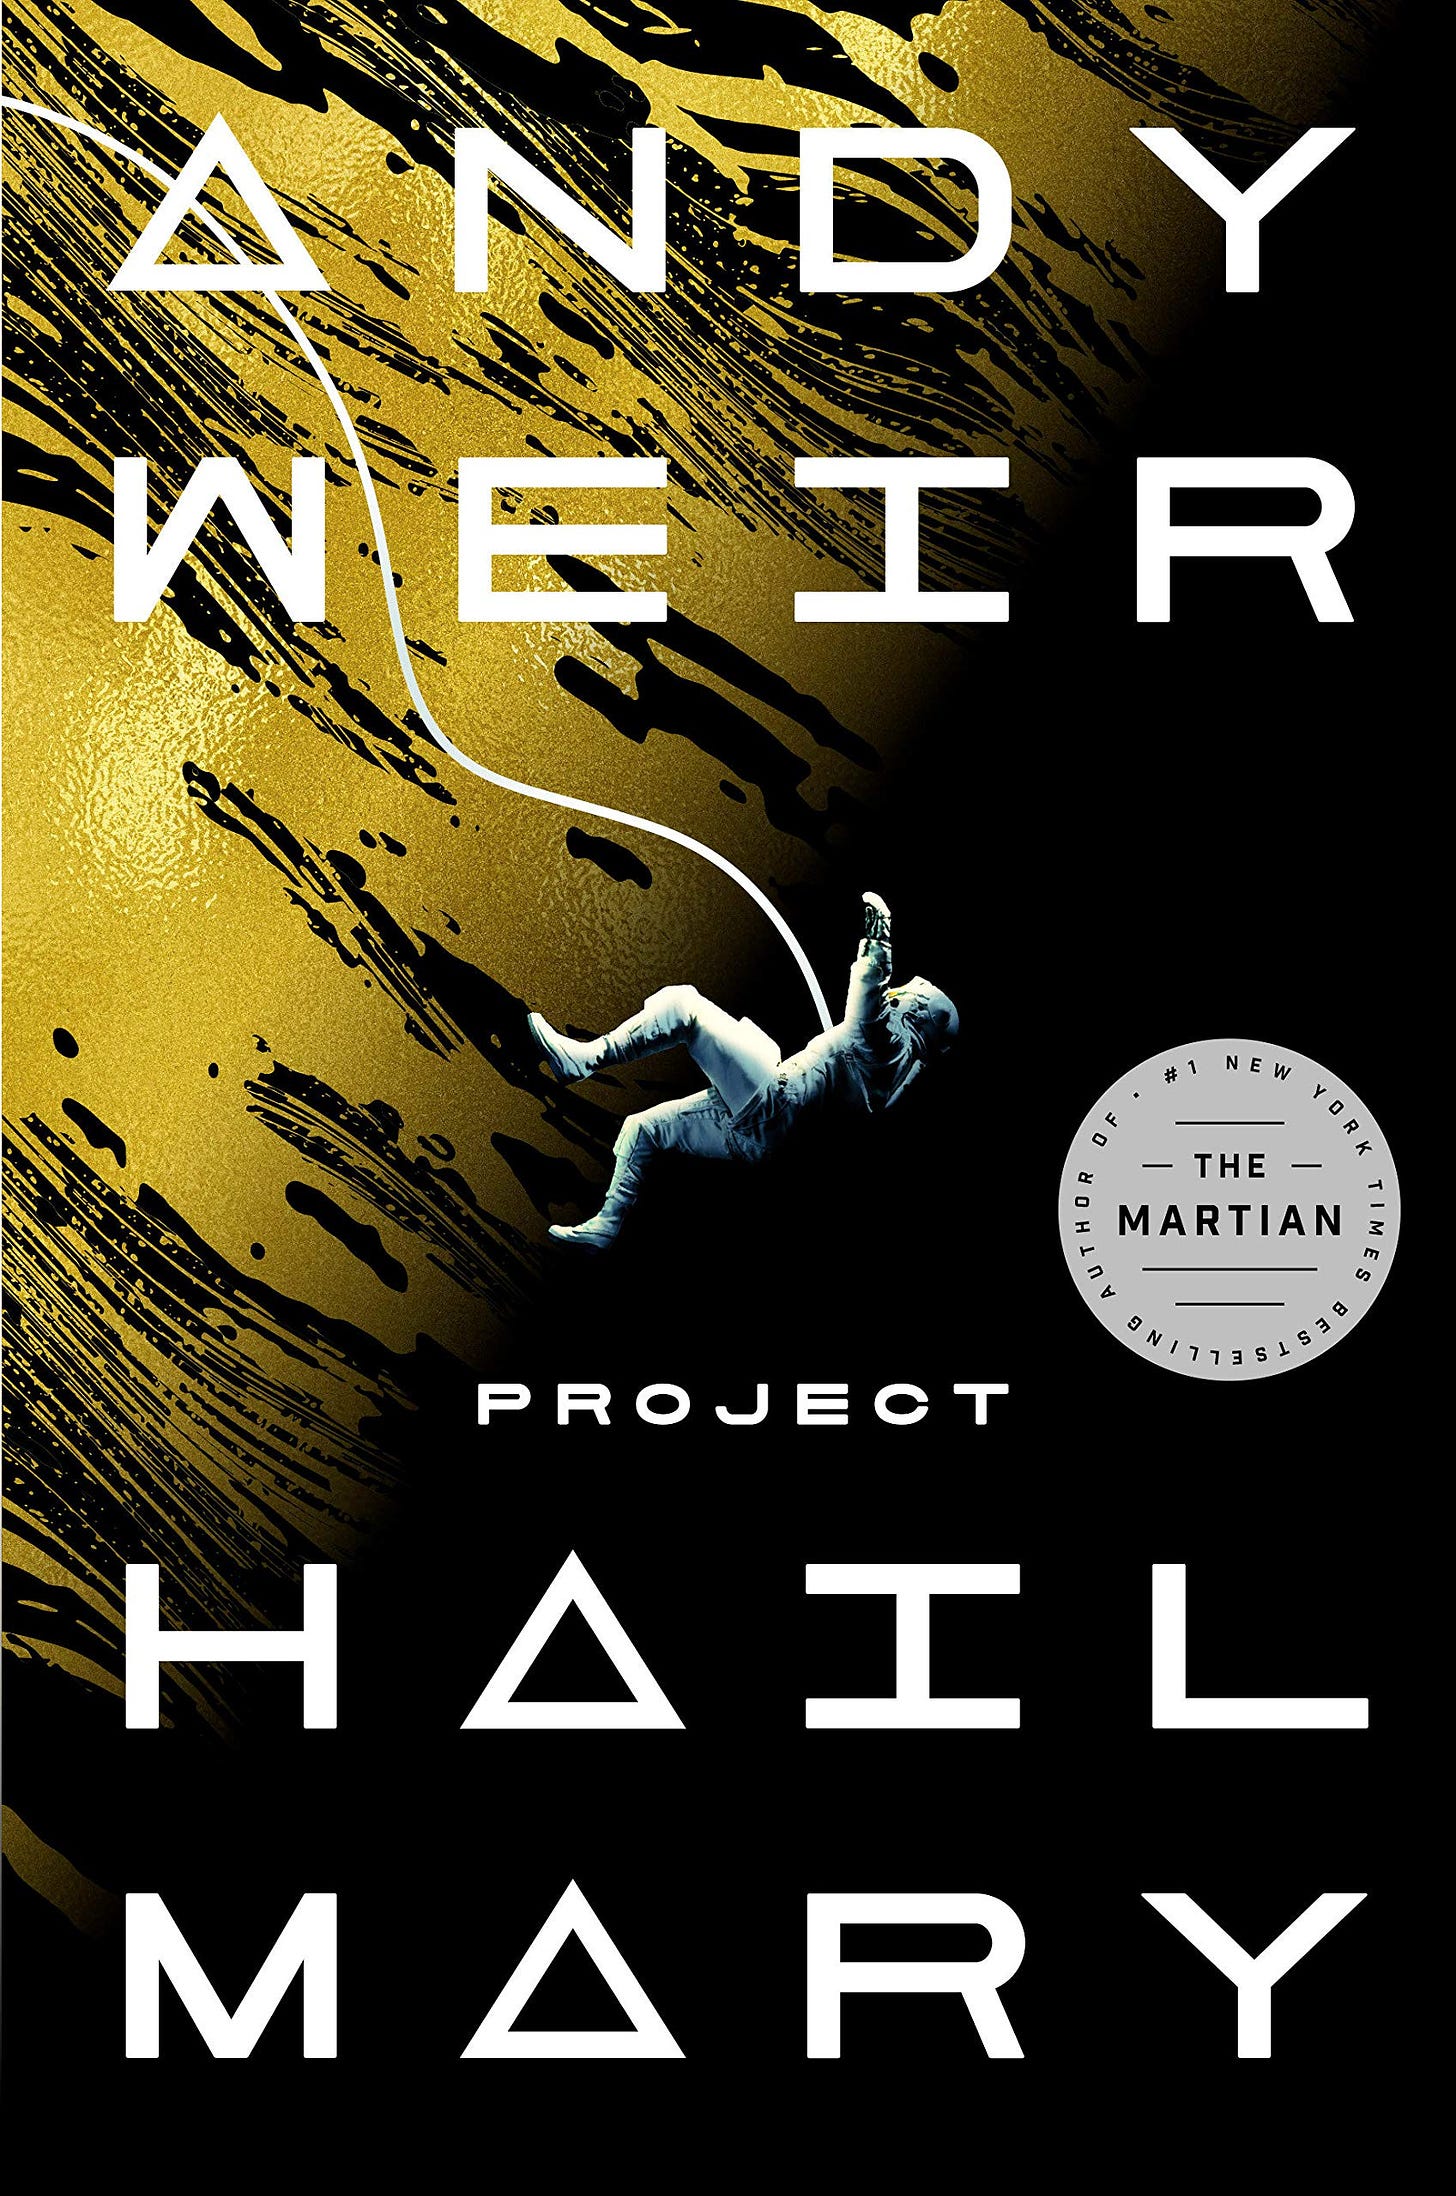 Buy Project Hail Mary: A Novel Book Online at Low Prices in India | Project  Hail Mary: A Novel Reviews &amp; Ratings - Amazon.in